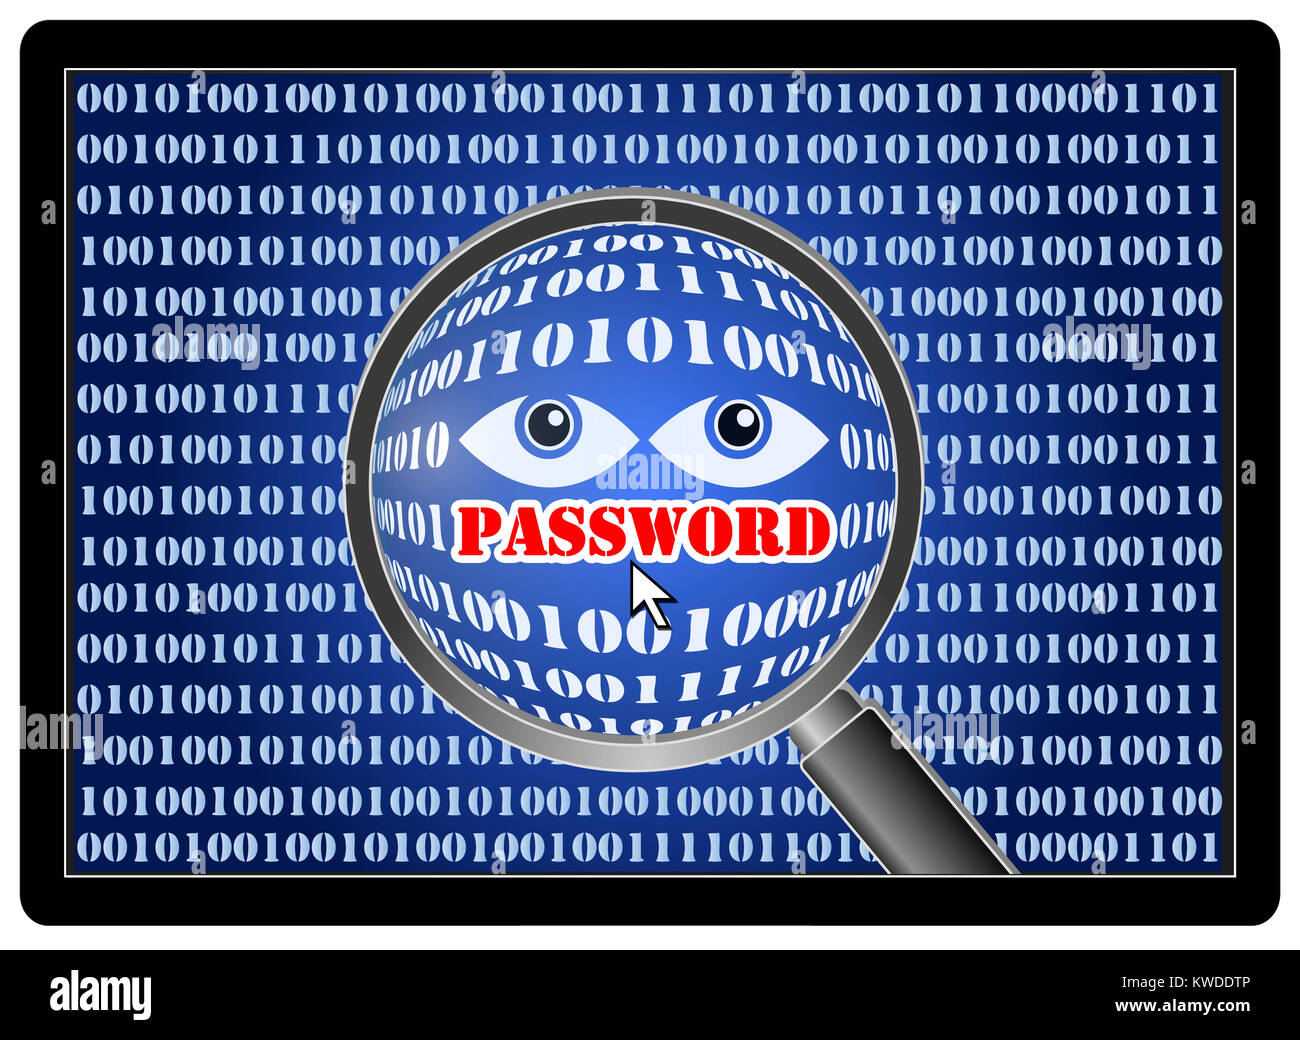 Software program to gain fraudulent access to confidential information like passwords Stock Photo